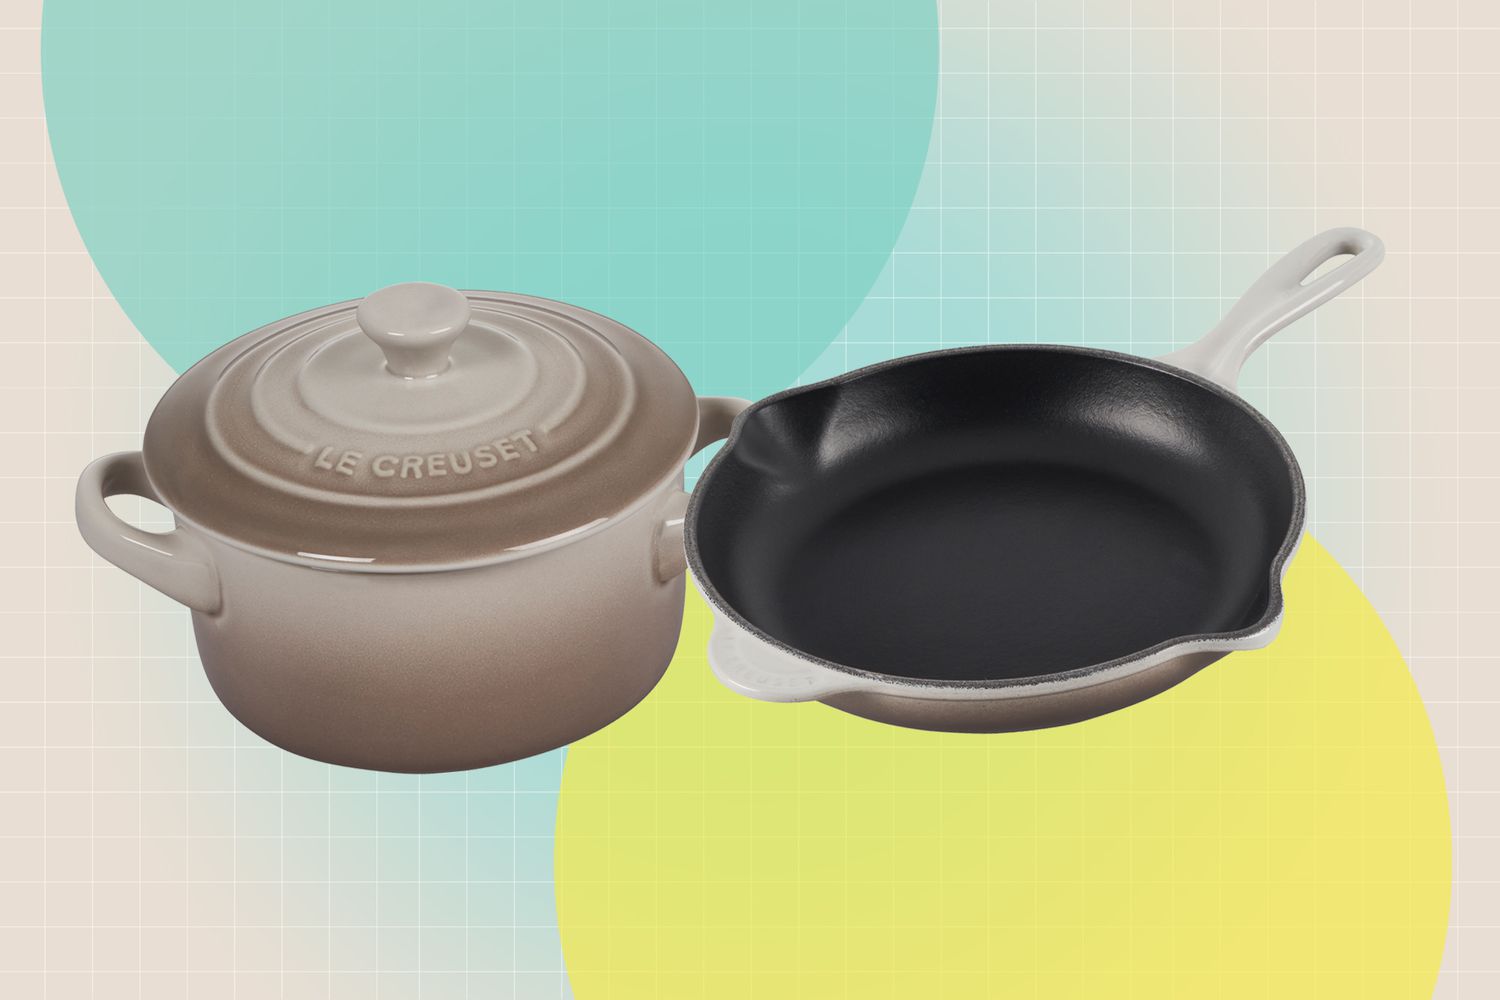 Le Creuset Just Launched a Pretty Neutral That Will Work in Any Kitchen